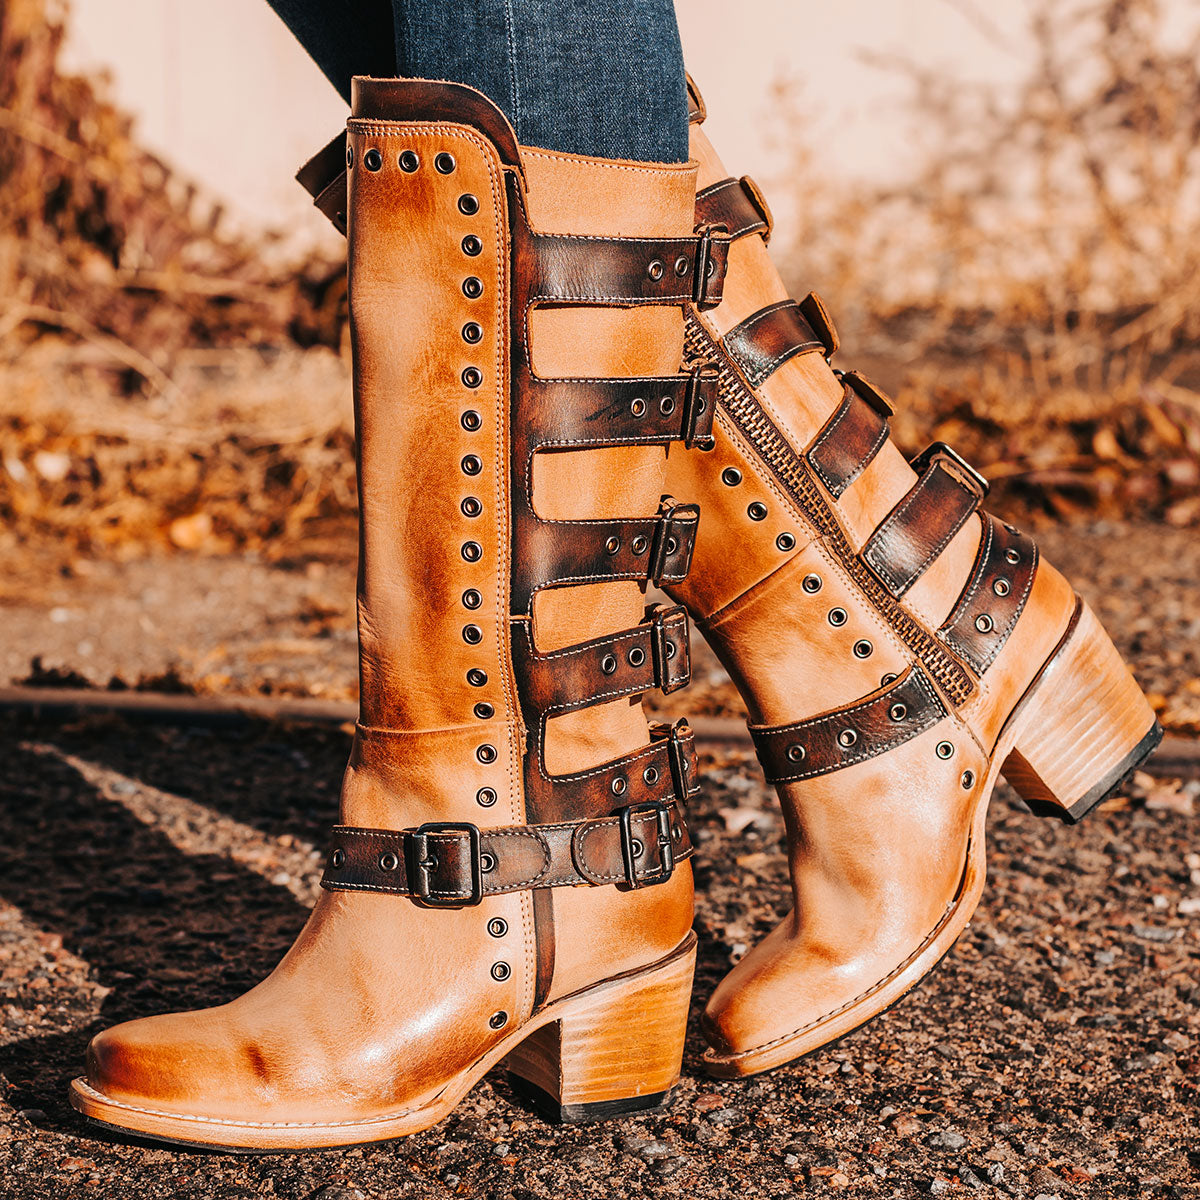 Buckles leather boots - Women